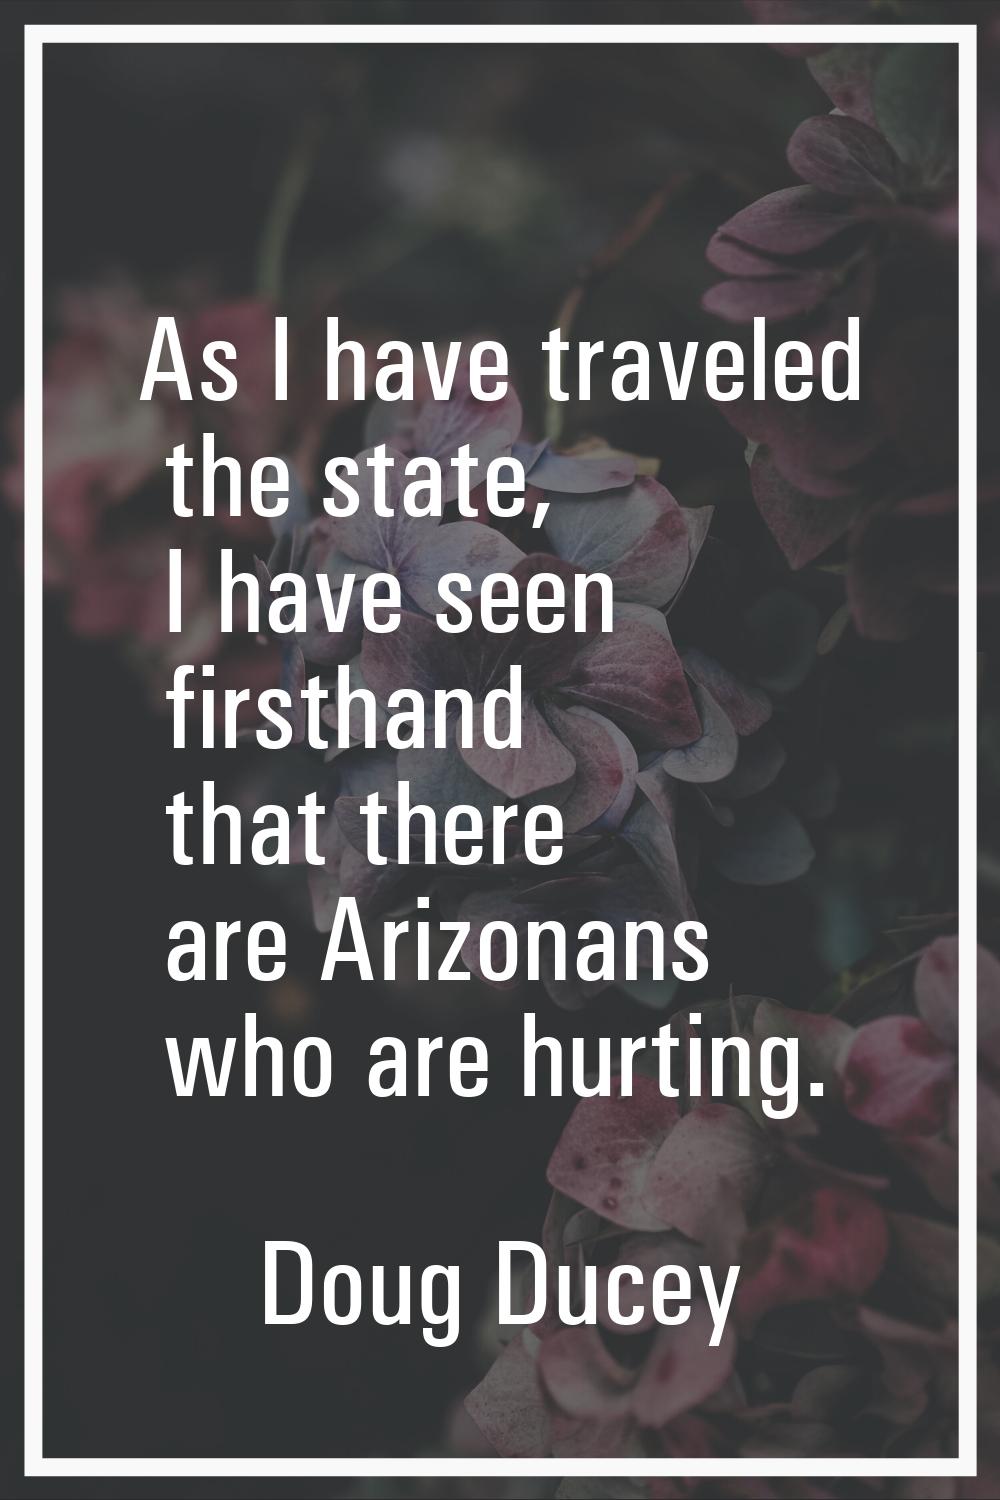 As I have traveled the state, I have seen firsthand that there are Arizonans who are hurting.